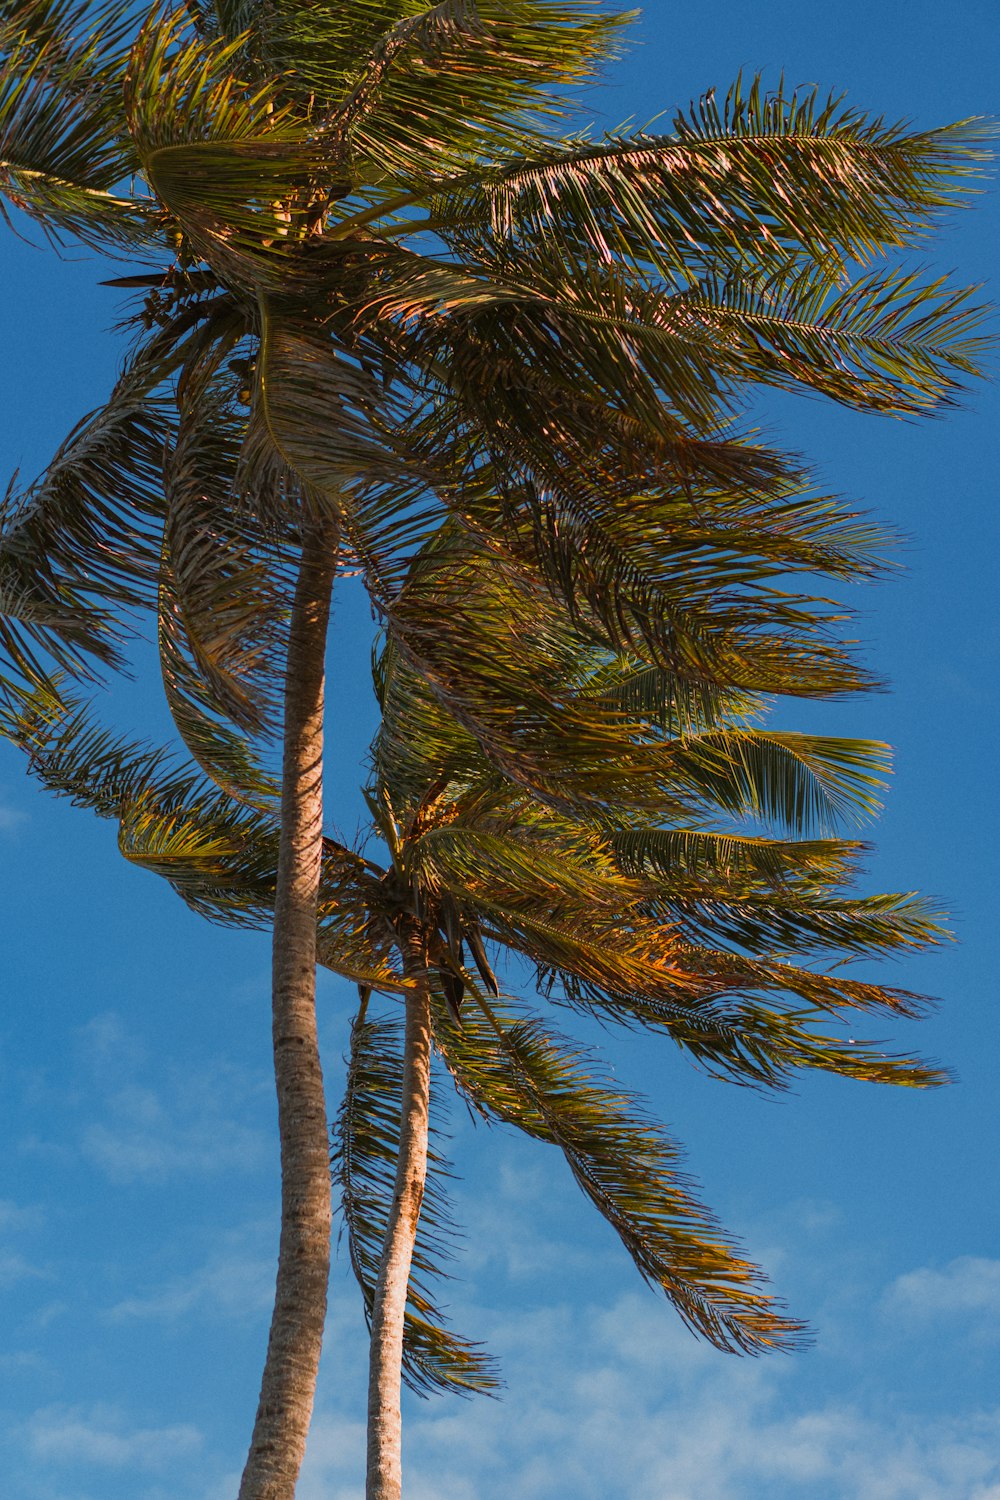 a palm tree blowing in the wind with a blue sky in the background